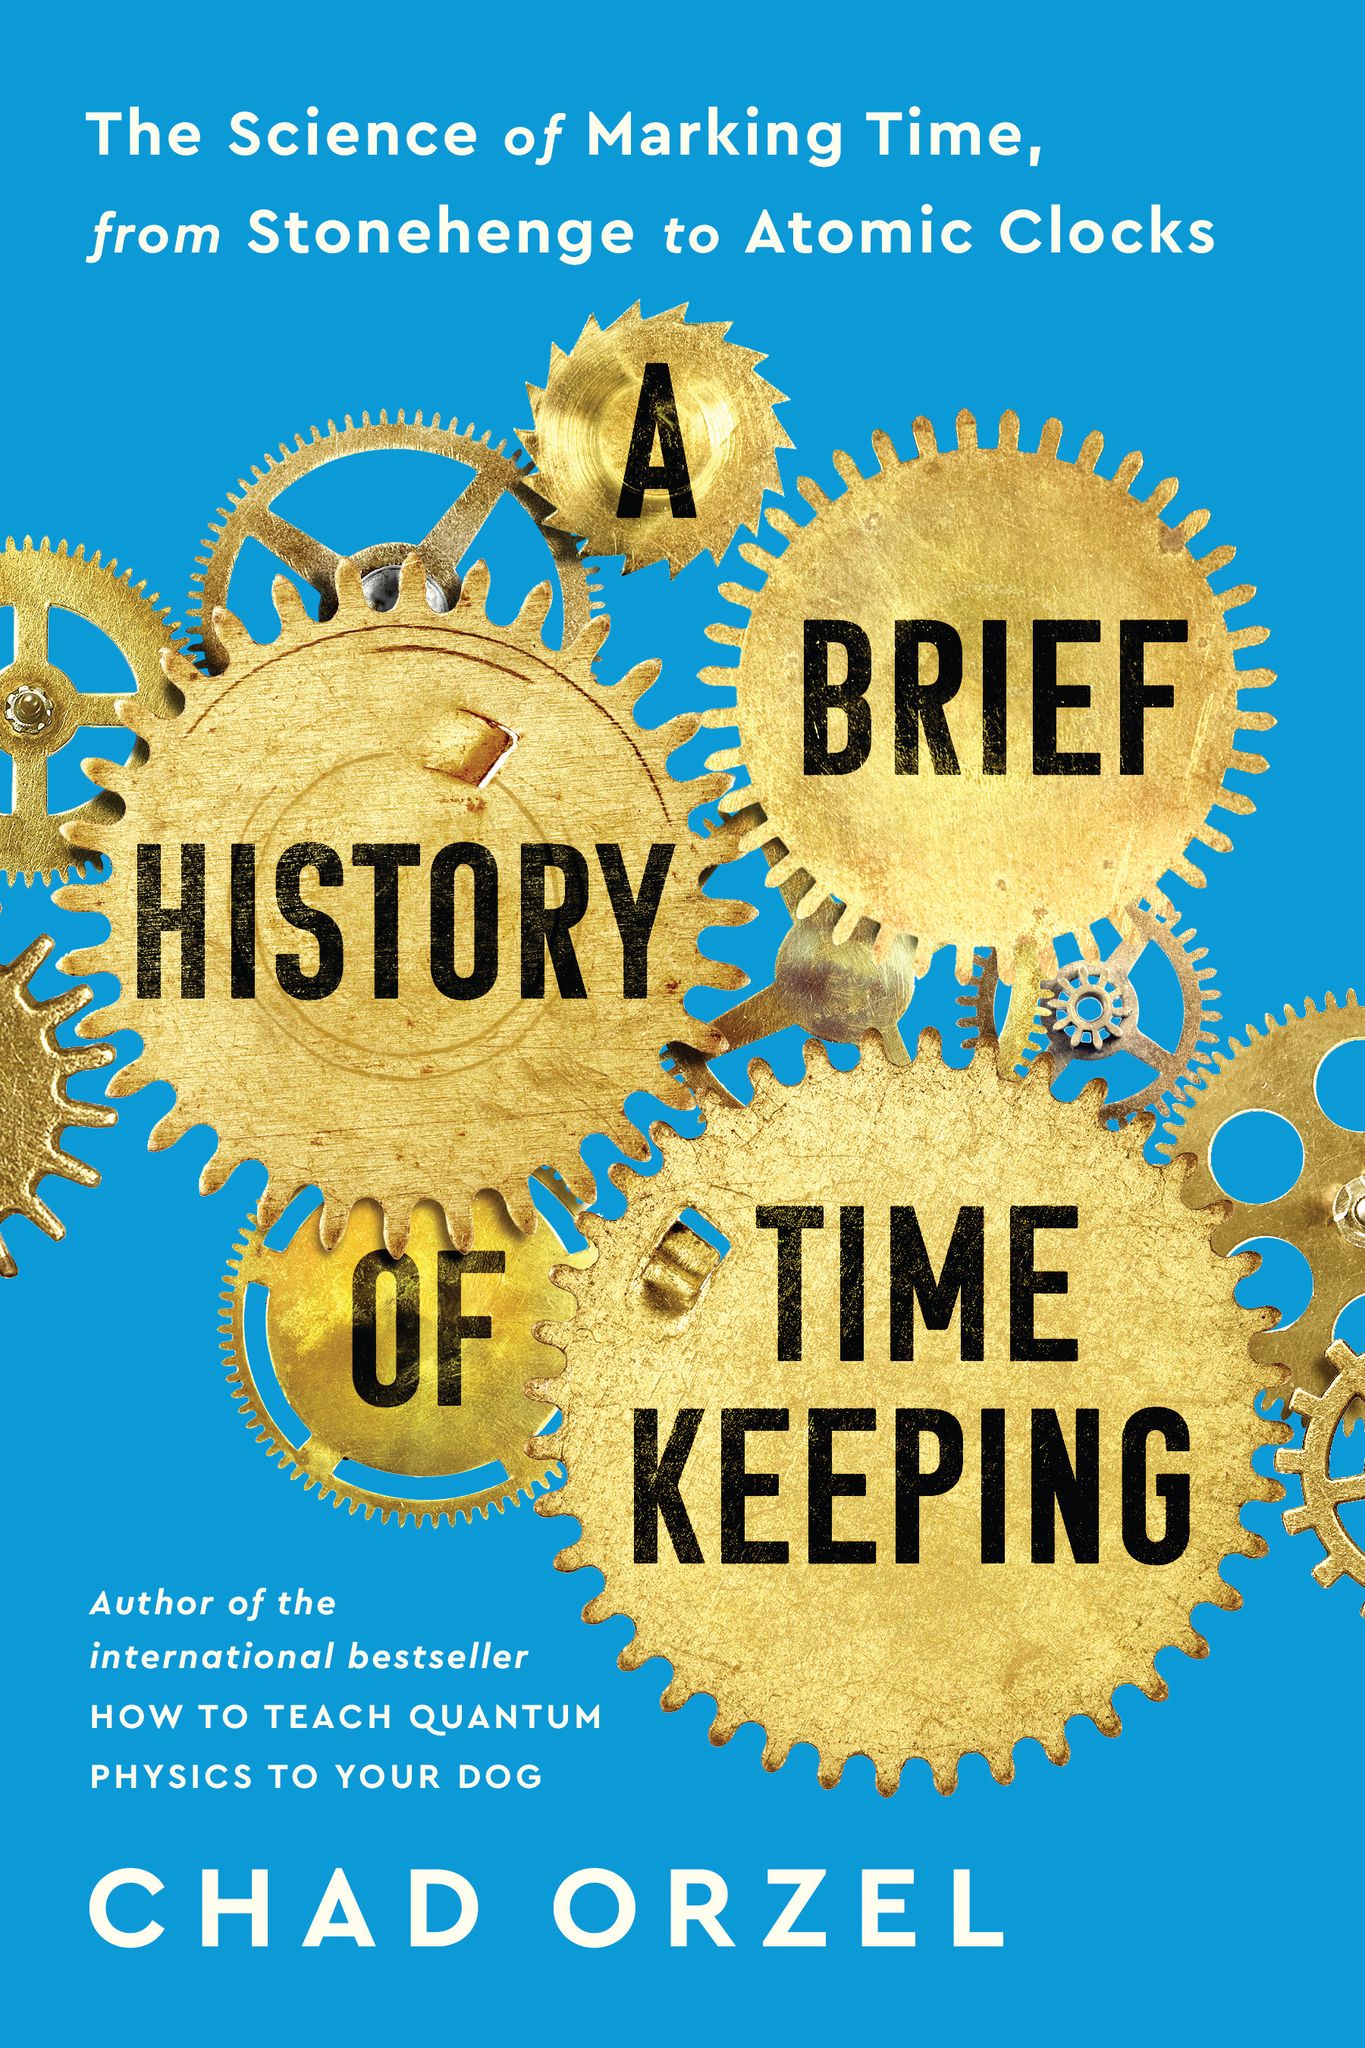 A matter of time: Union professor's new book explores the history of timekeeping - Union College